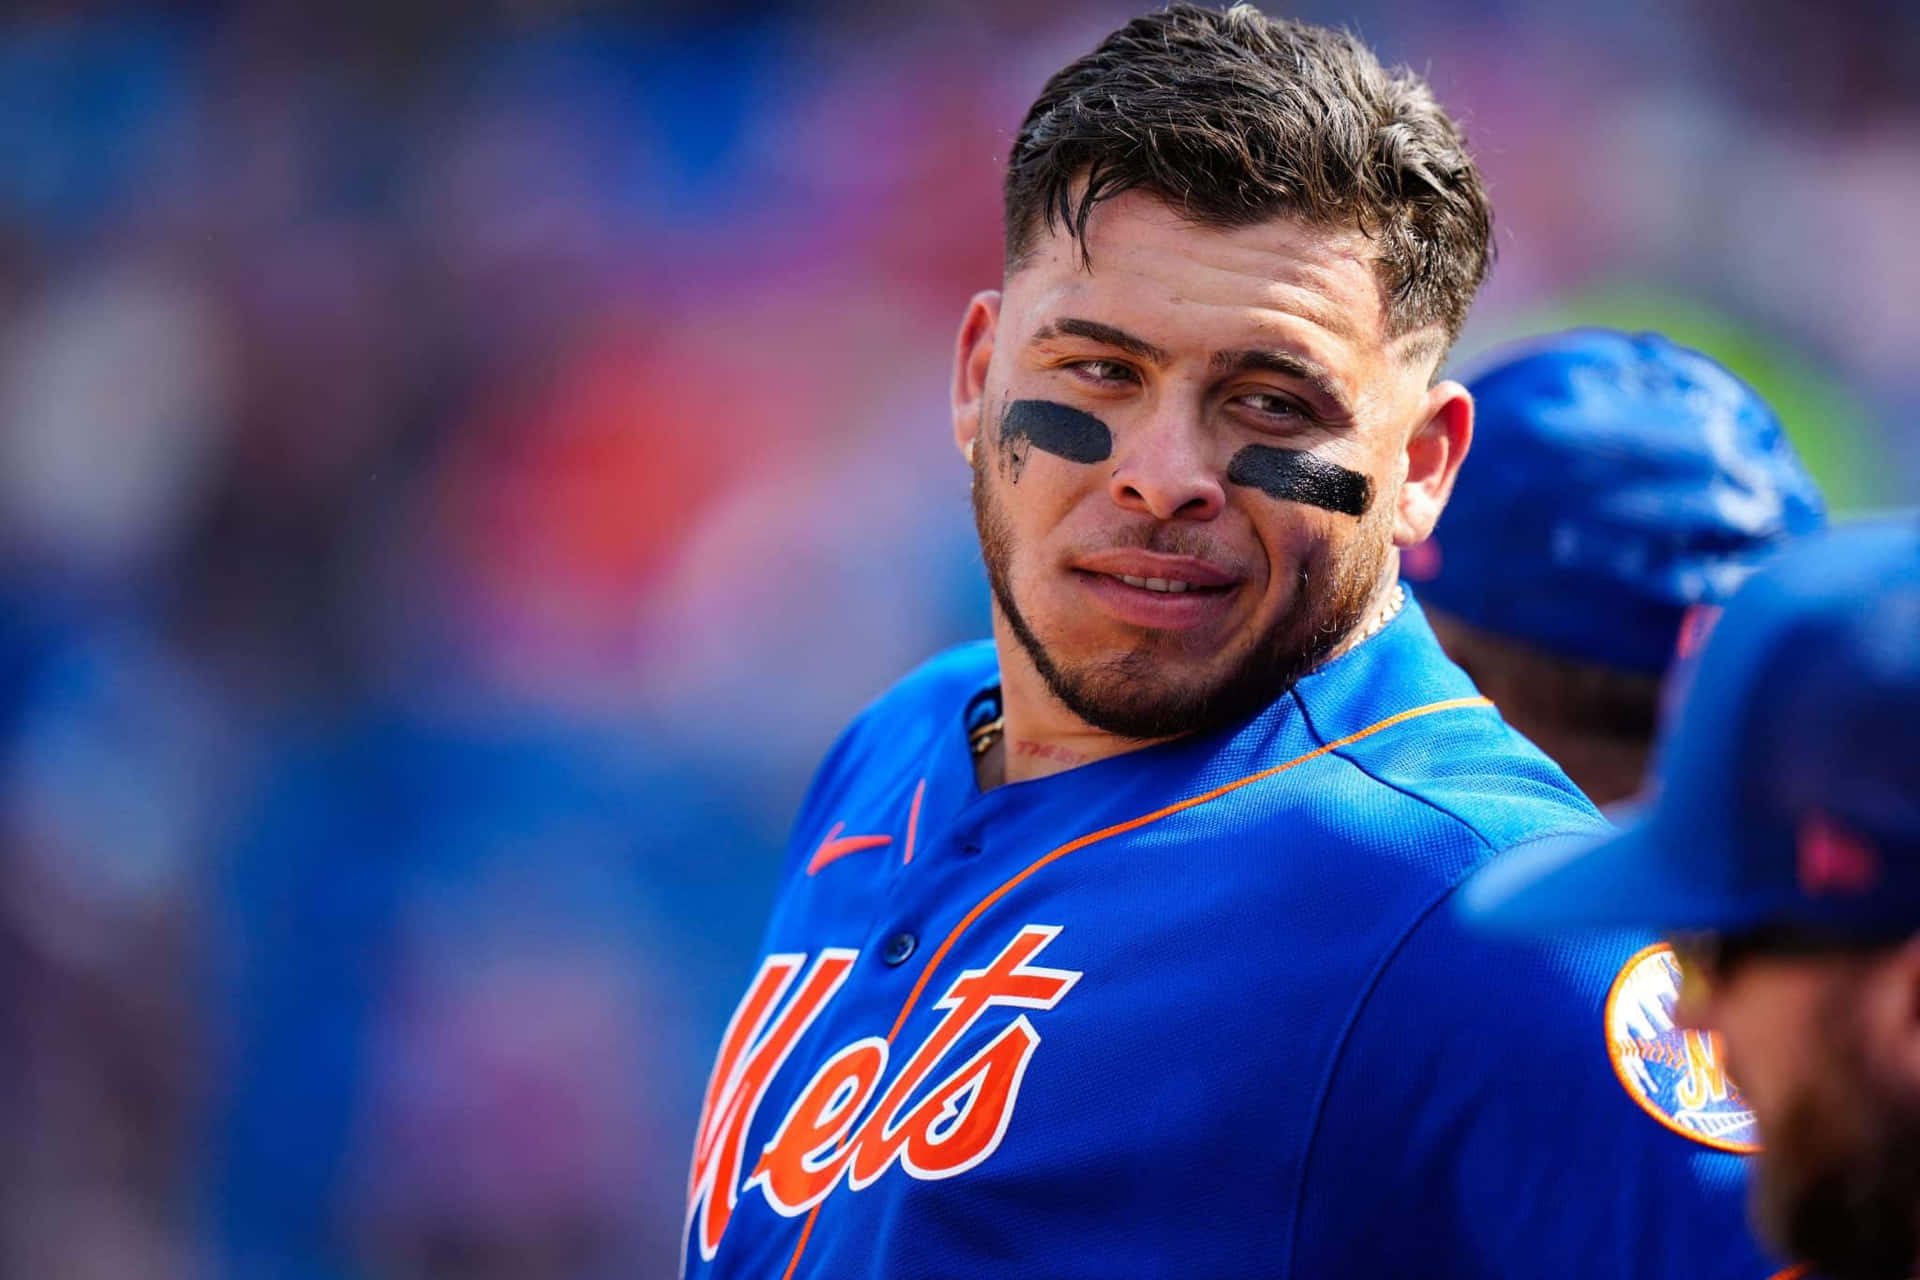 Mets Player Confident Smile Wallpaper